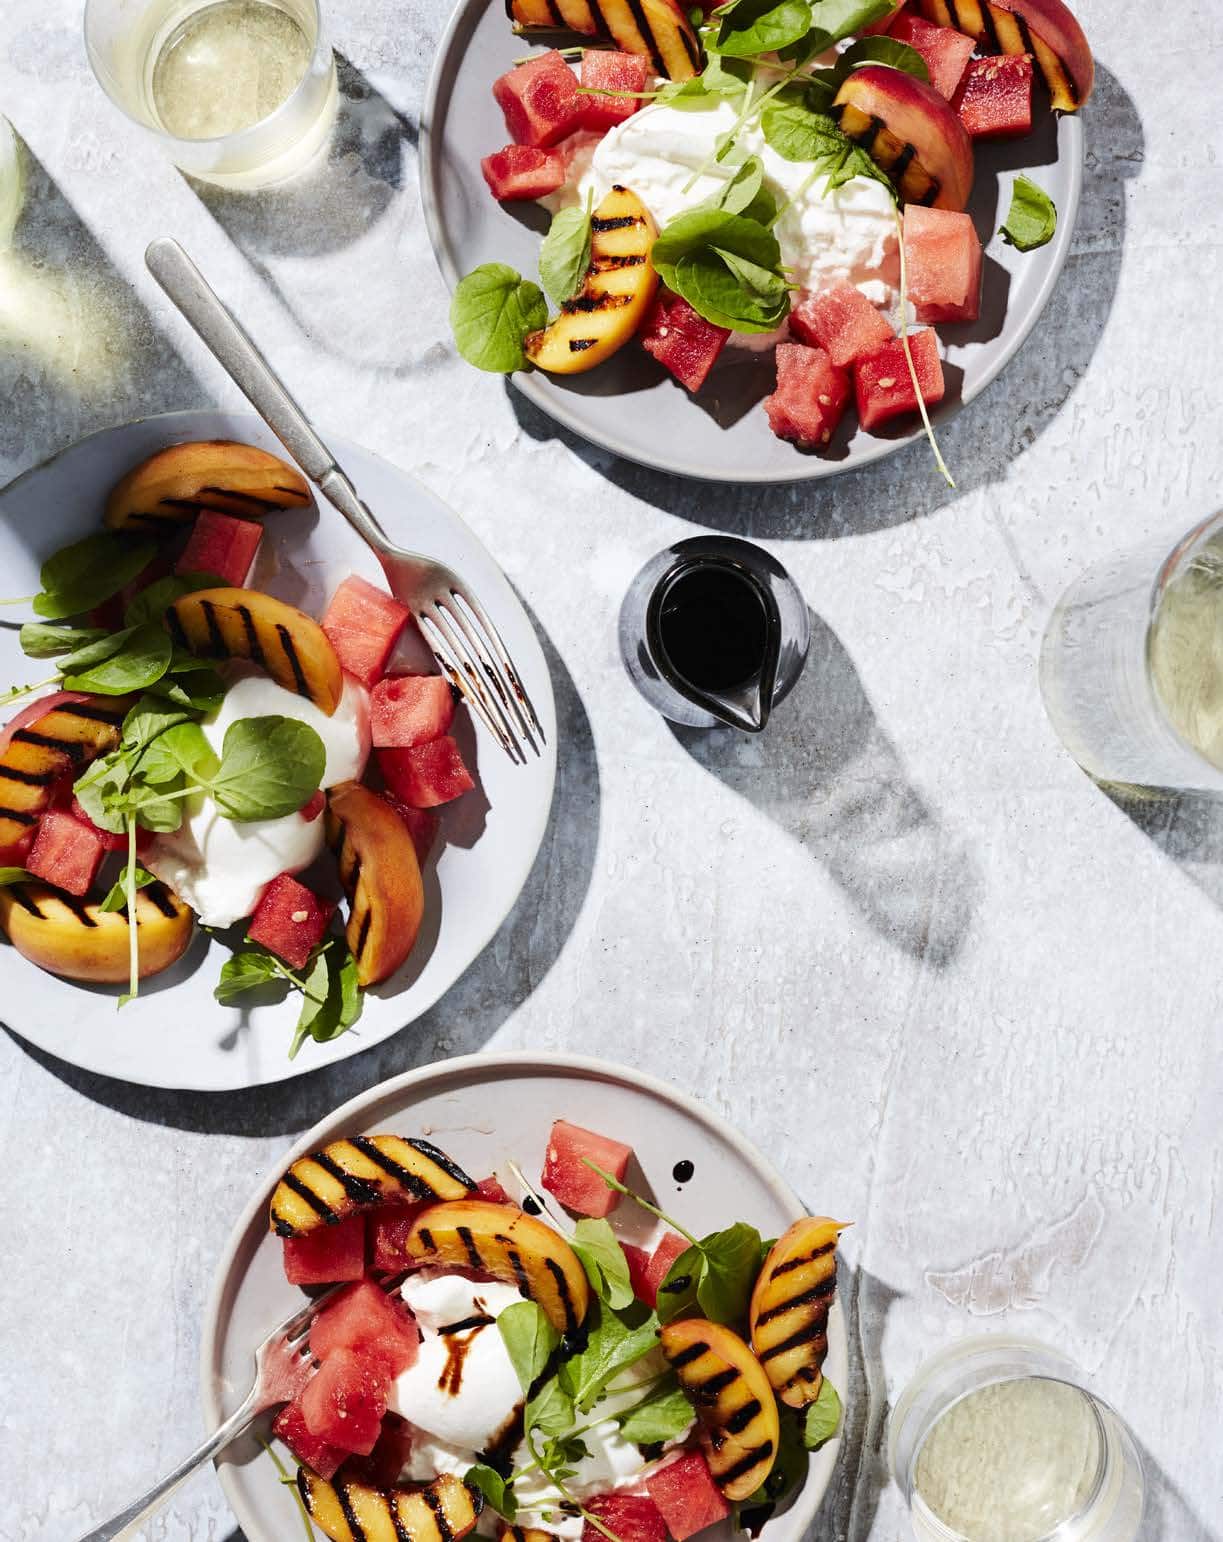 Although burrata—a fresh cheese made with mozzarella and cream—is undeniably the star of this light summer salad, the juicy grilled peaches and refreshing watermelon are pretty hard to resist. 